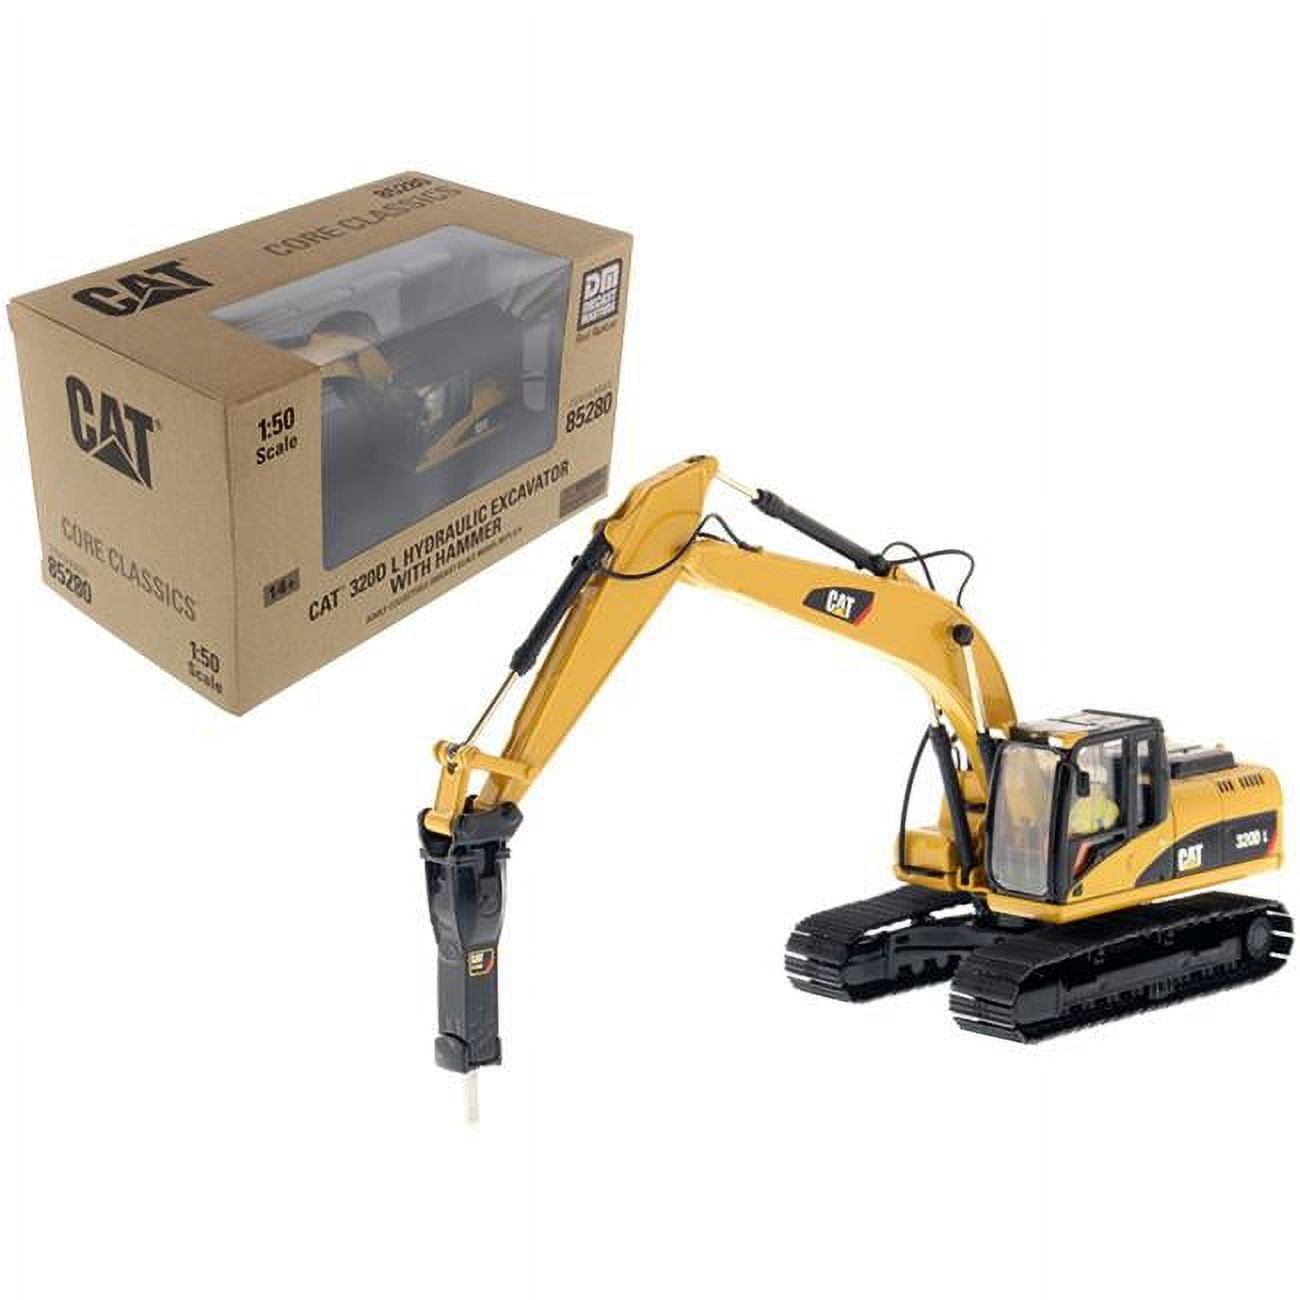 85280c 1 By 50 Scale Diecast Hydraulic Excavator For Cat Caterpillar 330d L Model